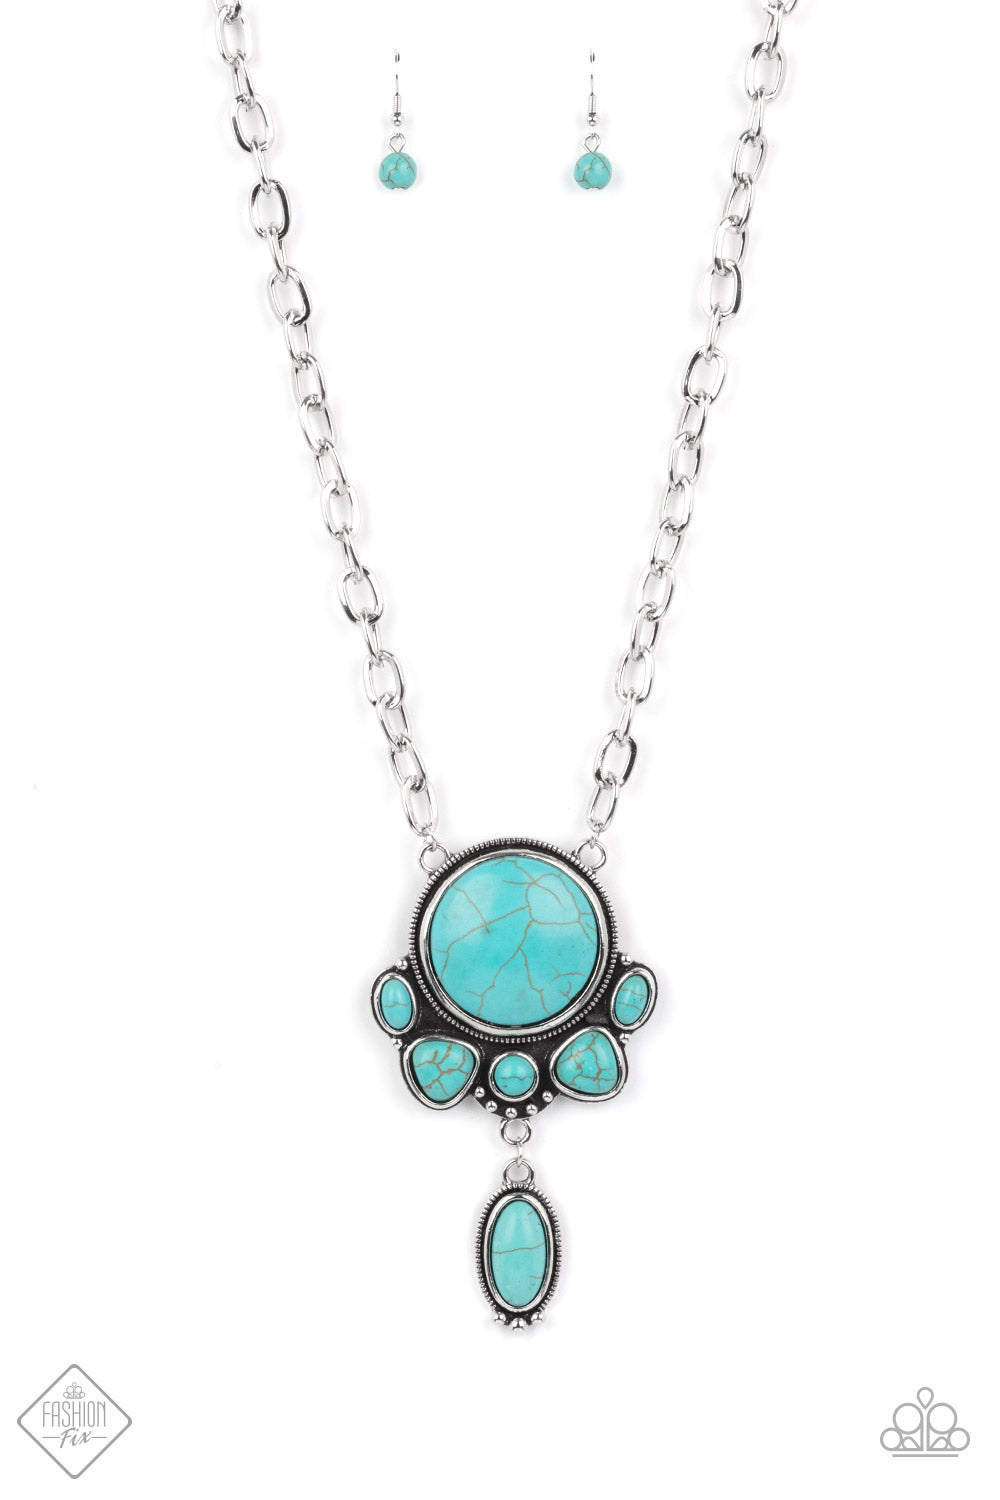 Paparazzi Accessories - Geographically Gorgeous - Blue Necklace  Fashion Fix March 2021